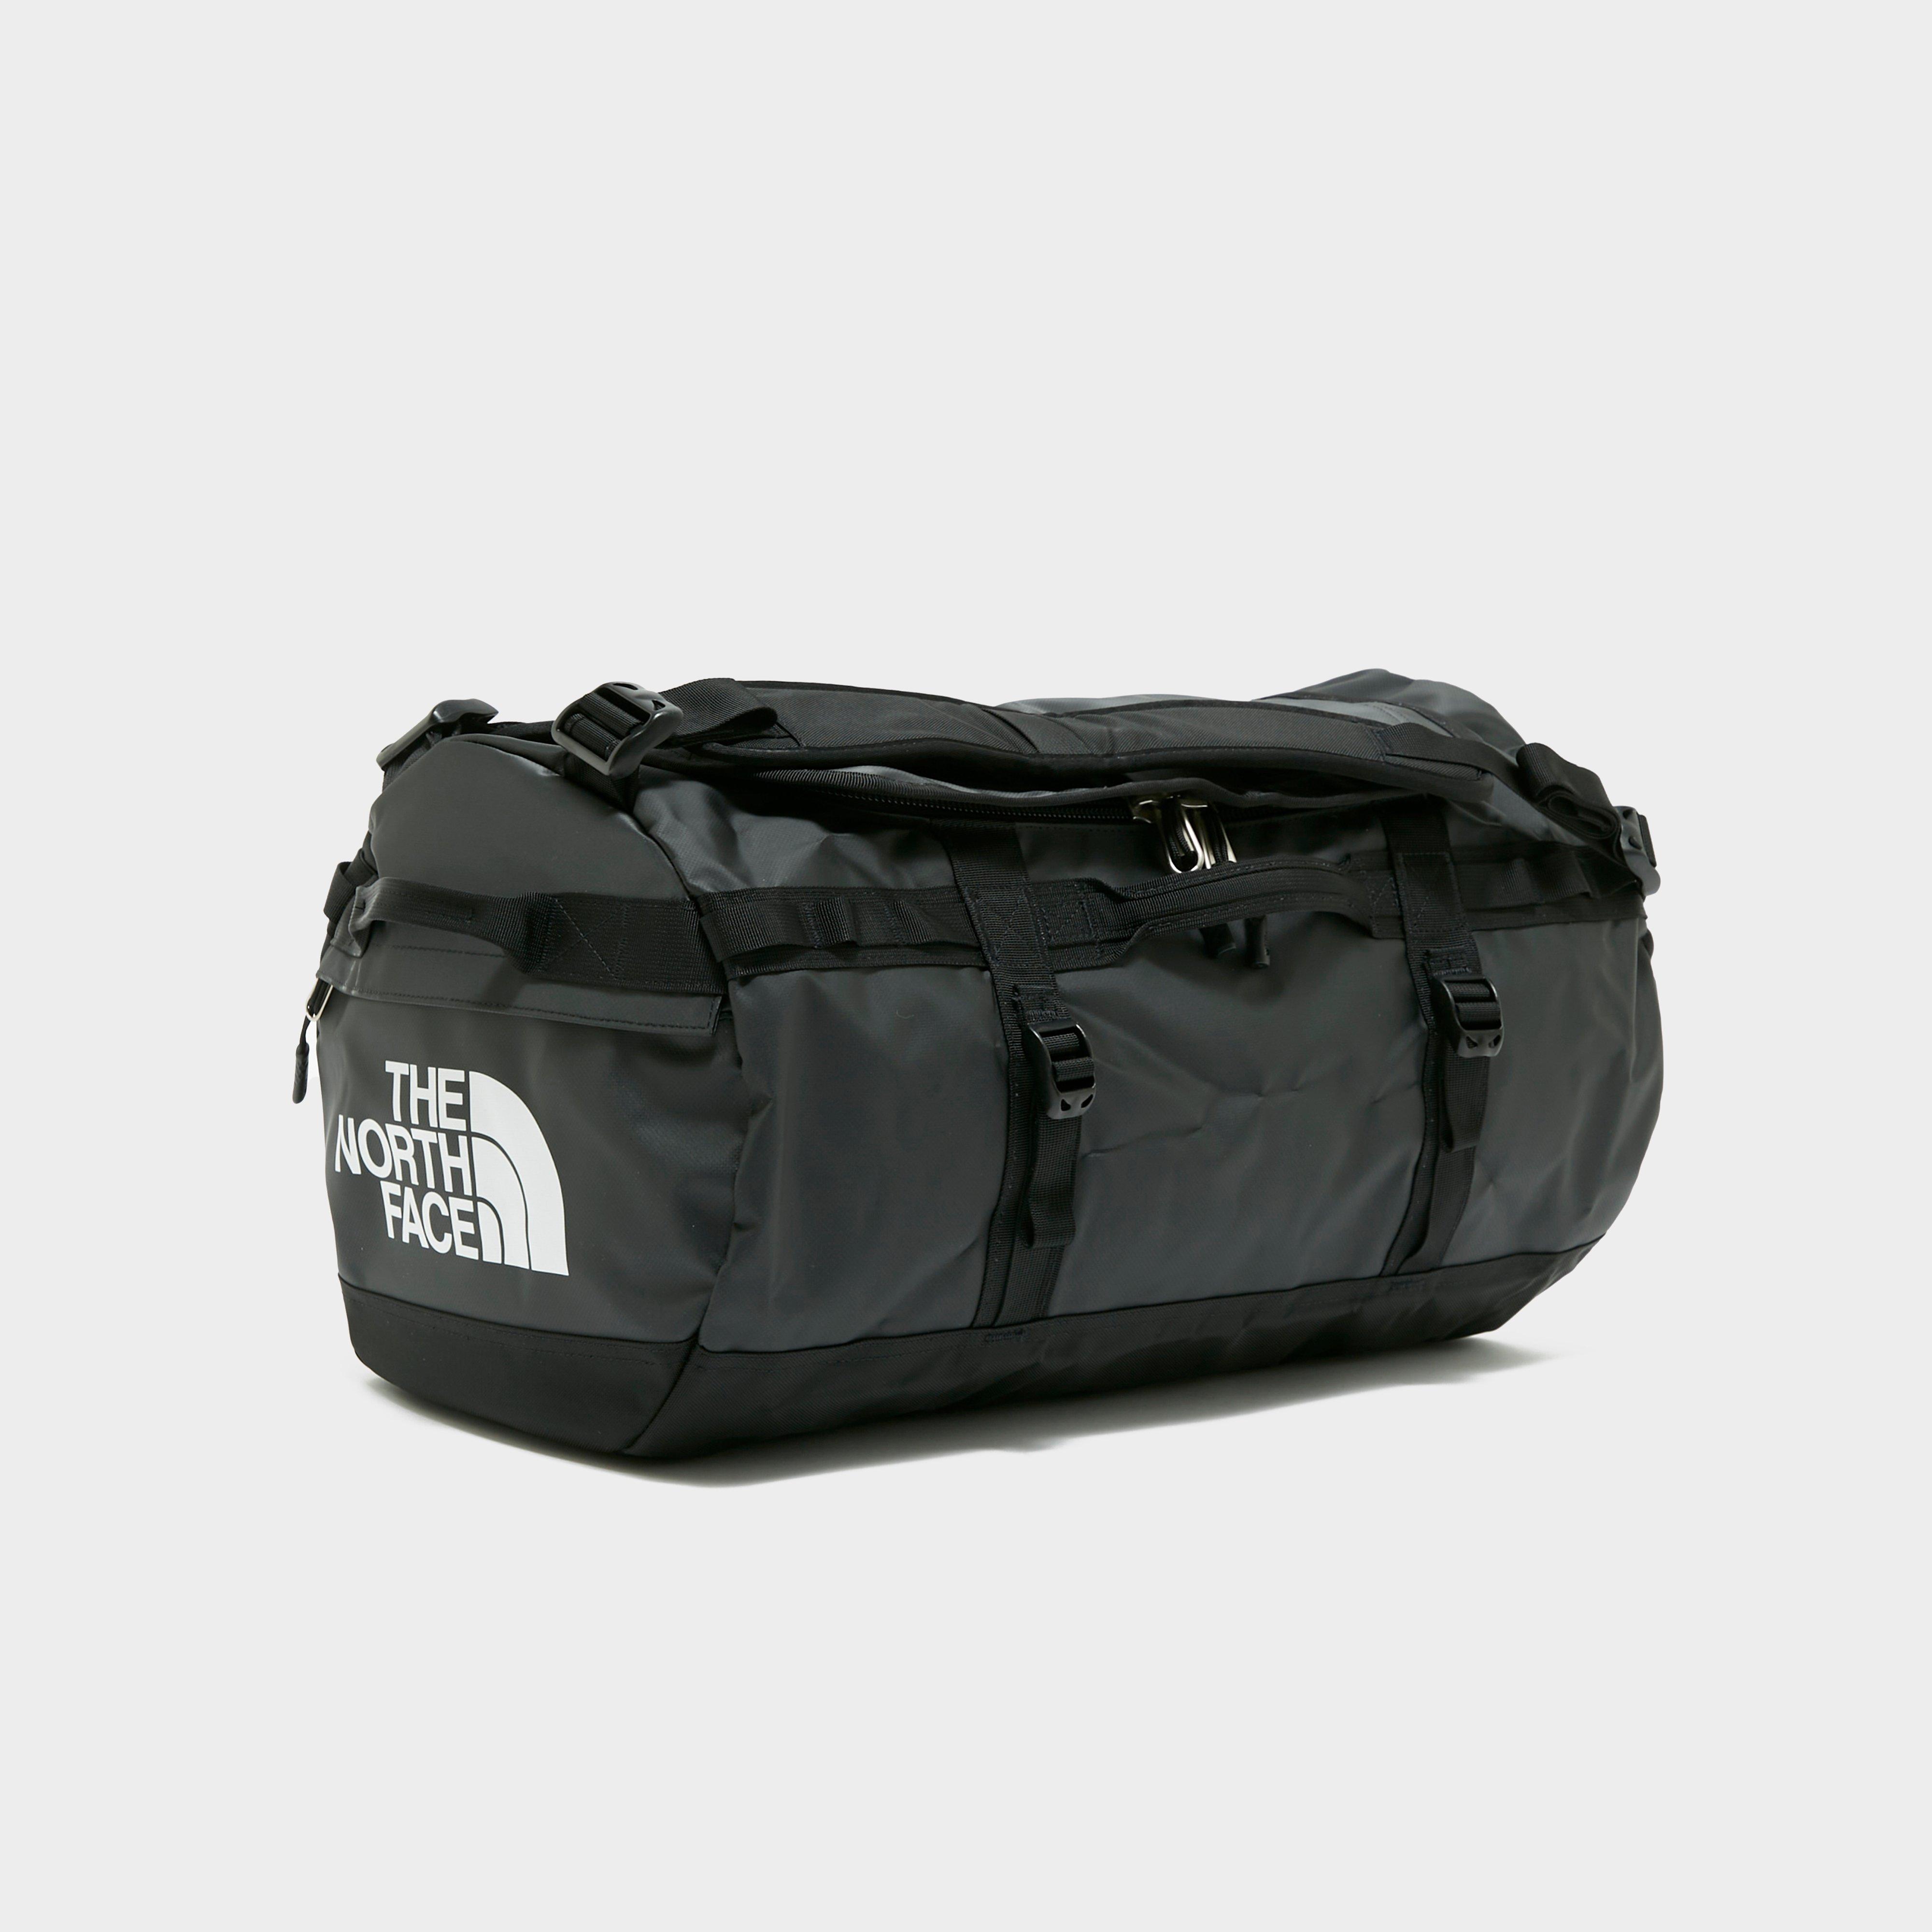 The North Face The North Face Base Camp Duffel Bag (Small) - Black, Black